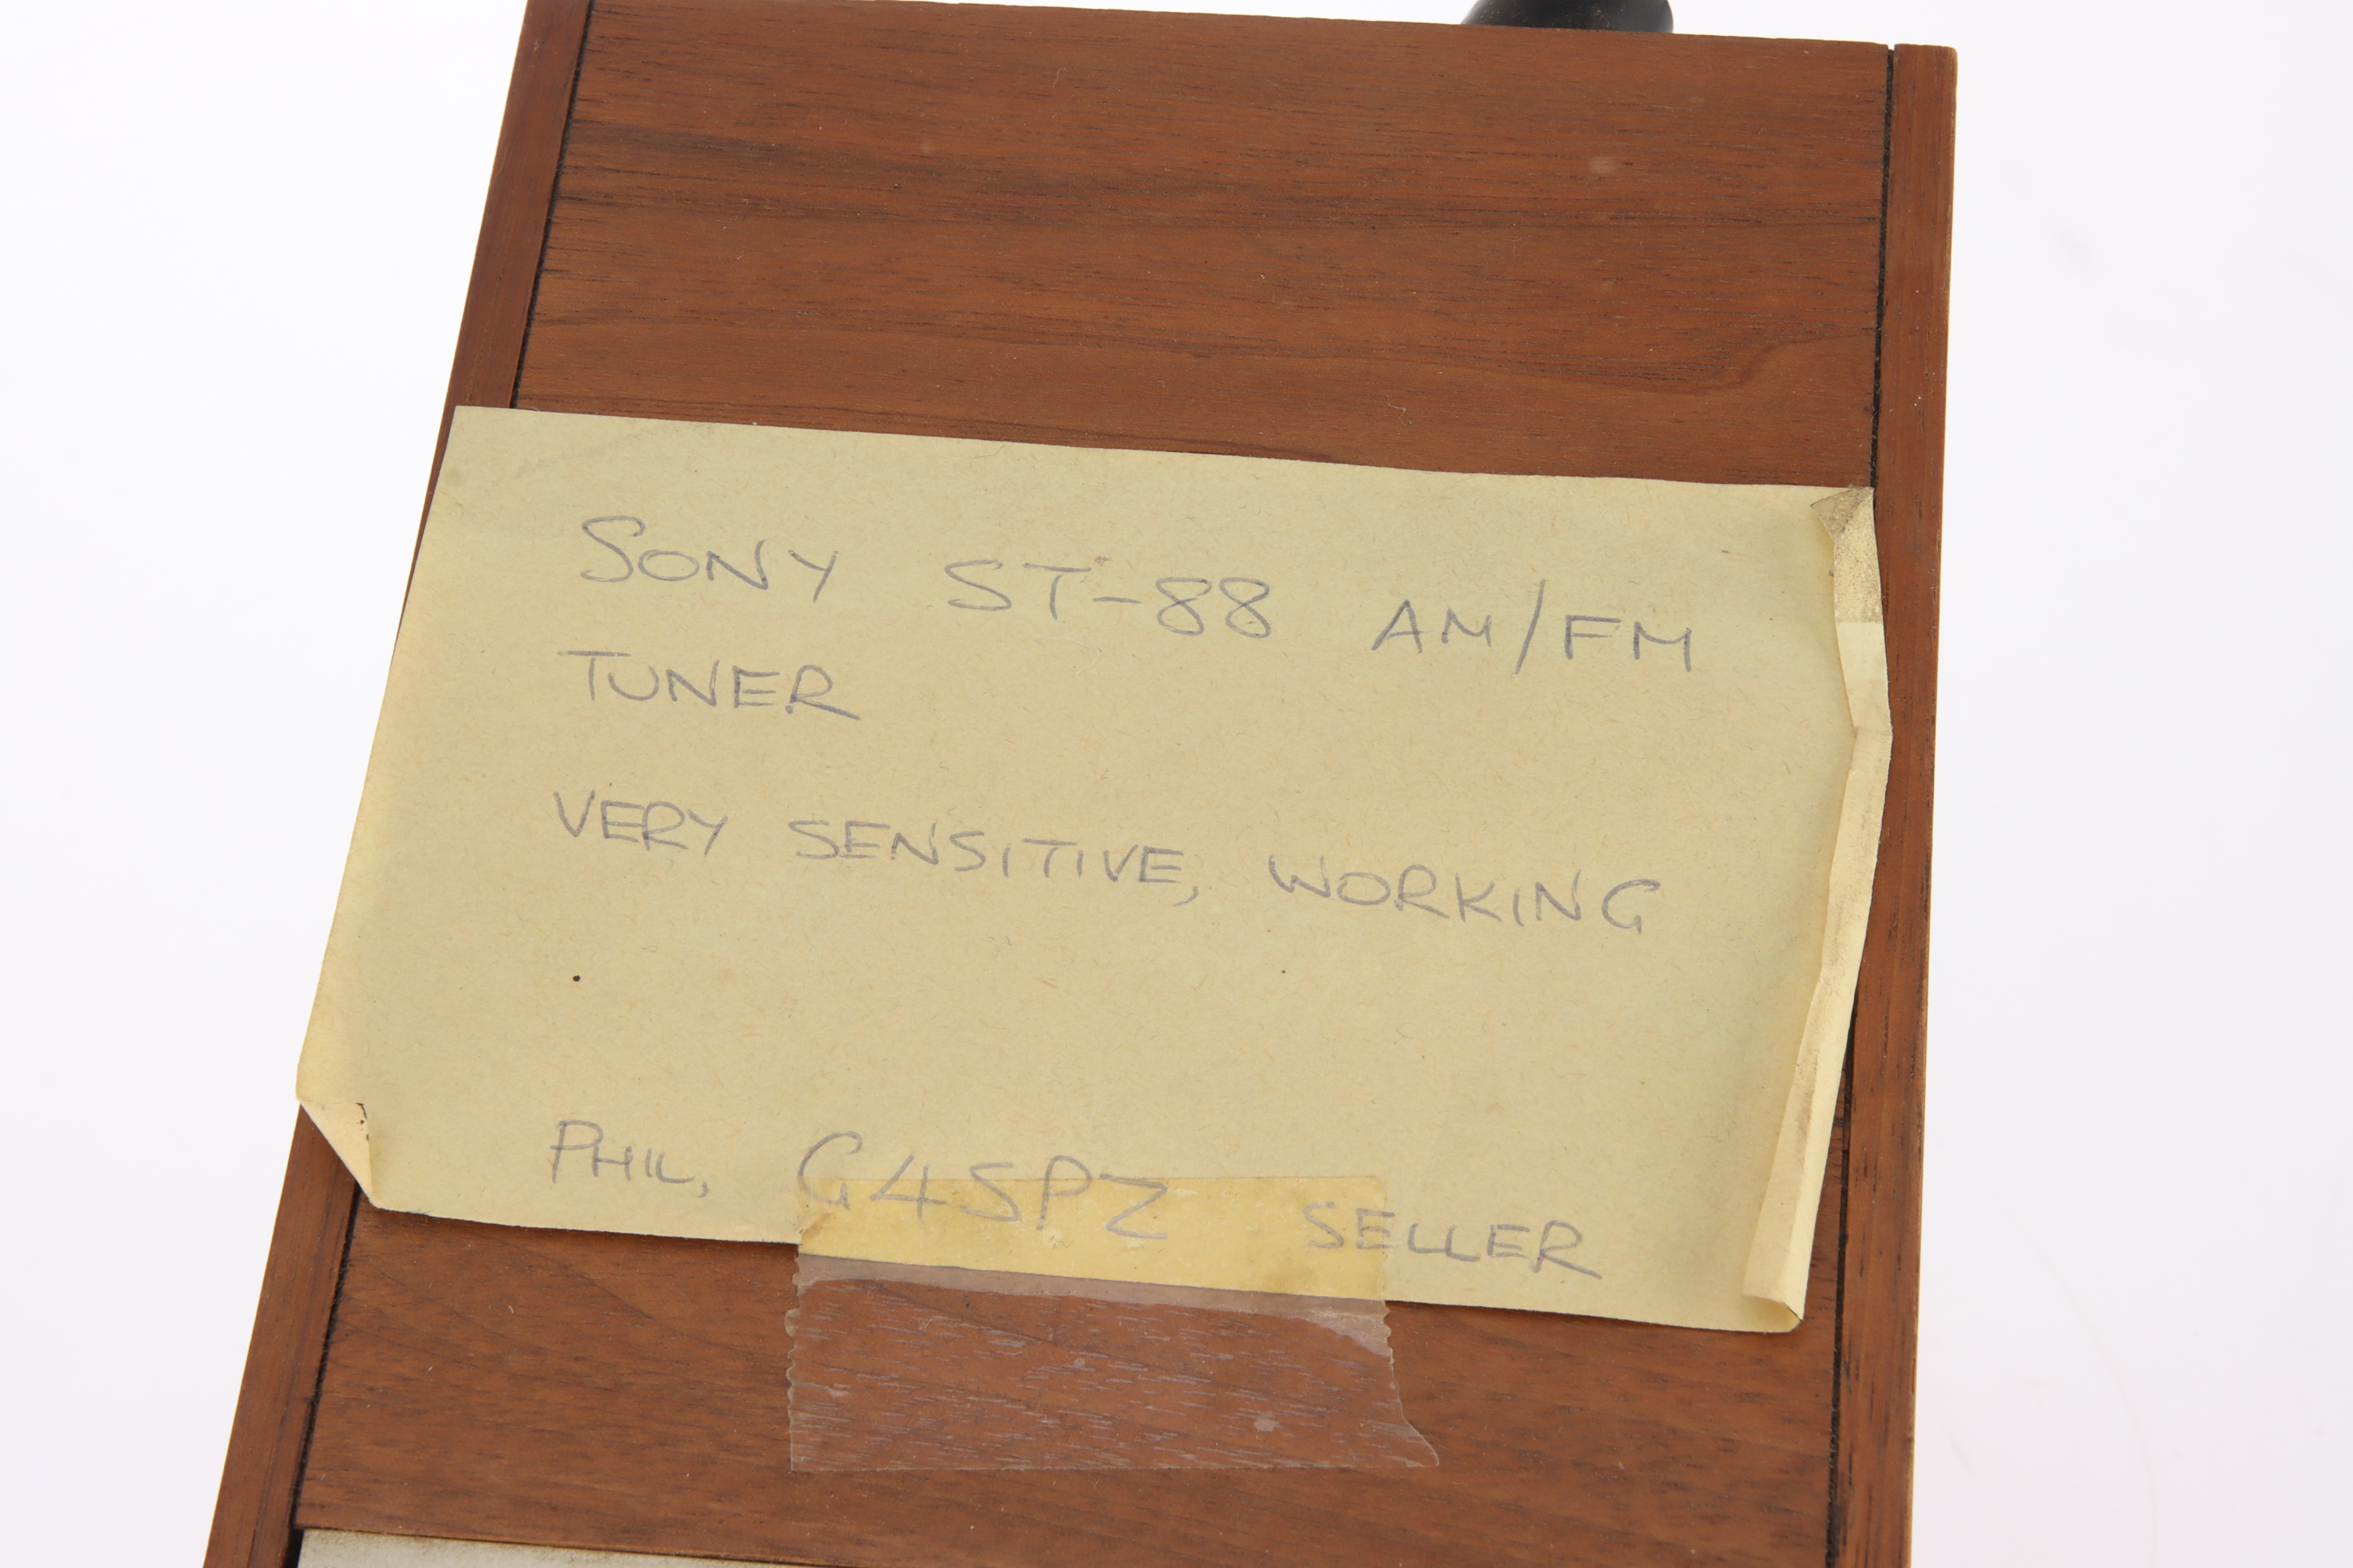 A Sony ST-88 Solid State Stereo Tuner, - Image 2 of 3